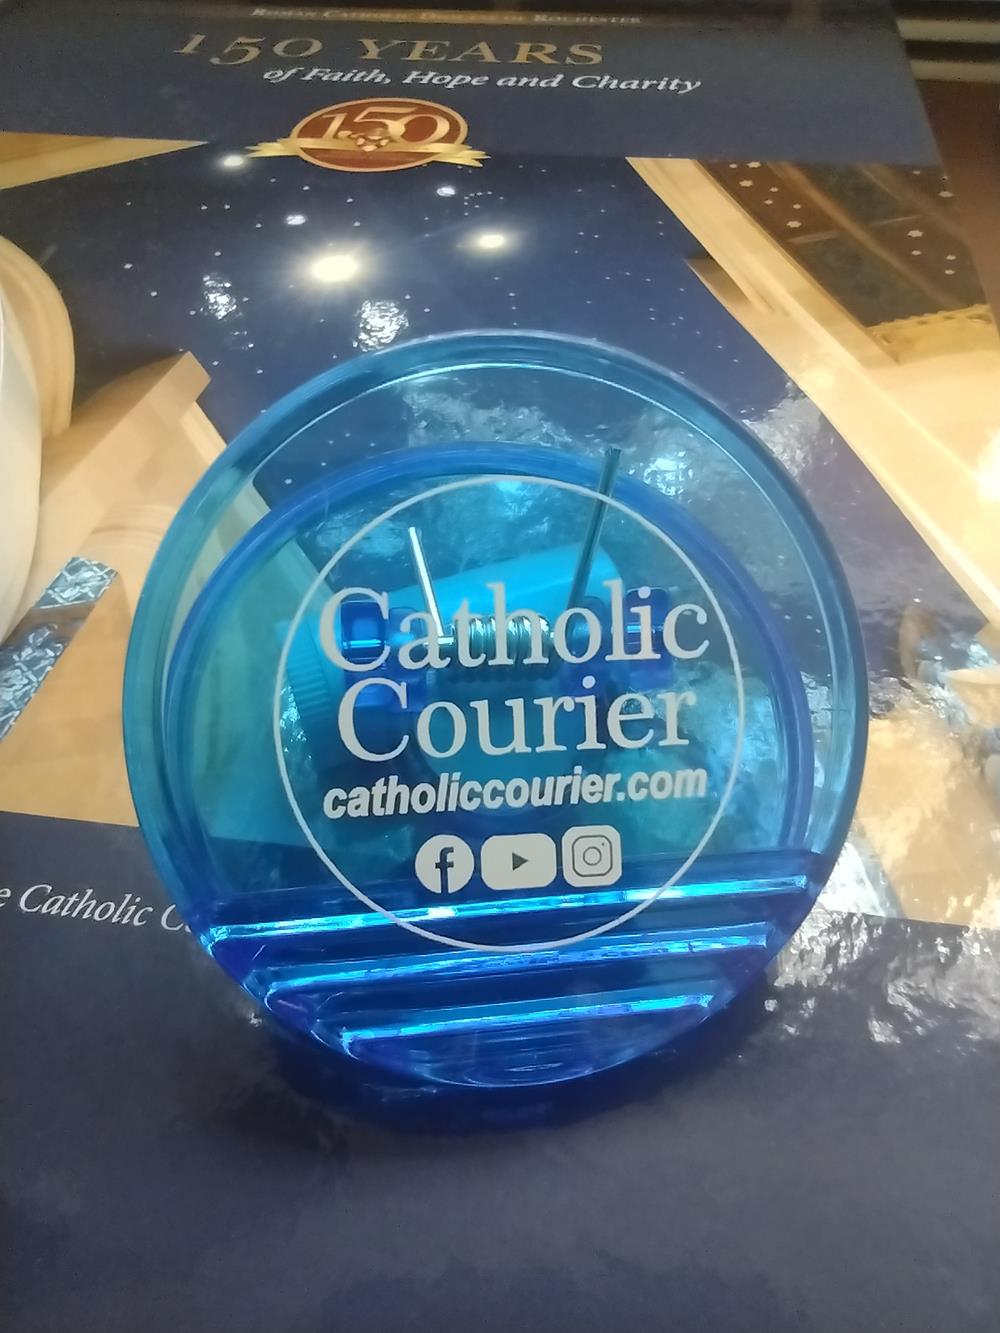 a blue plastic object on a table